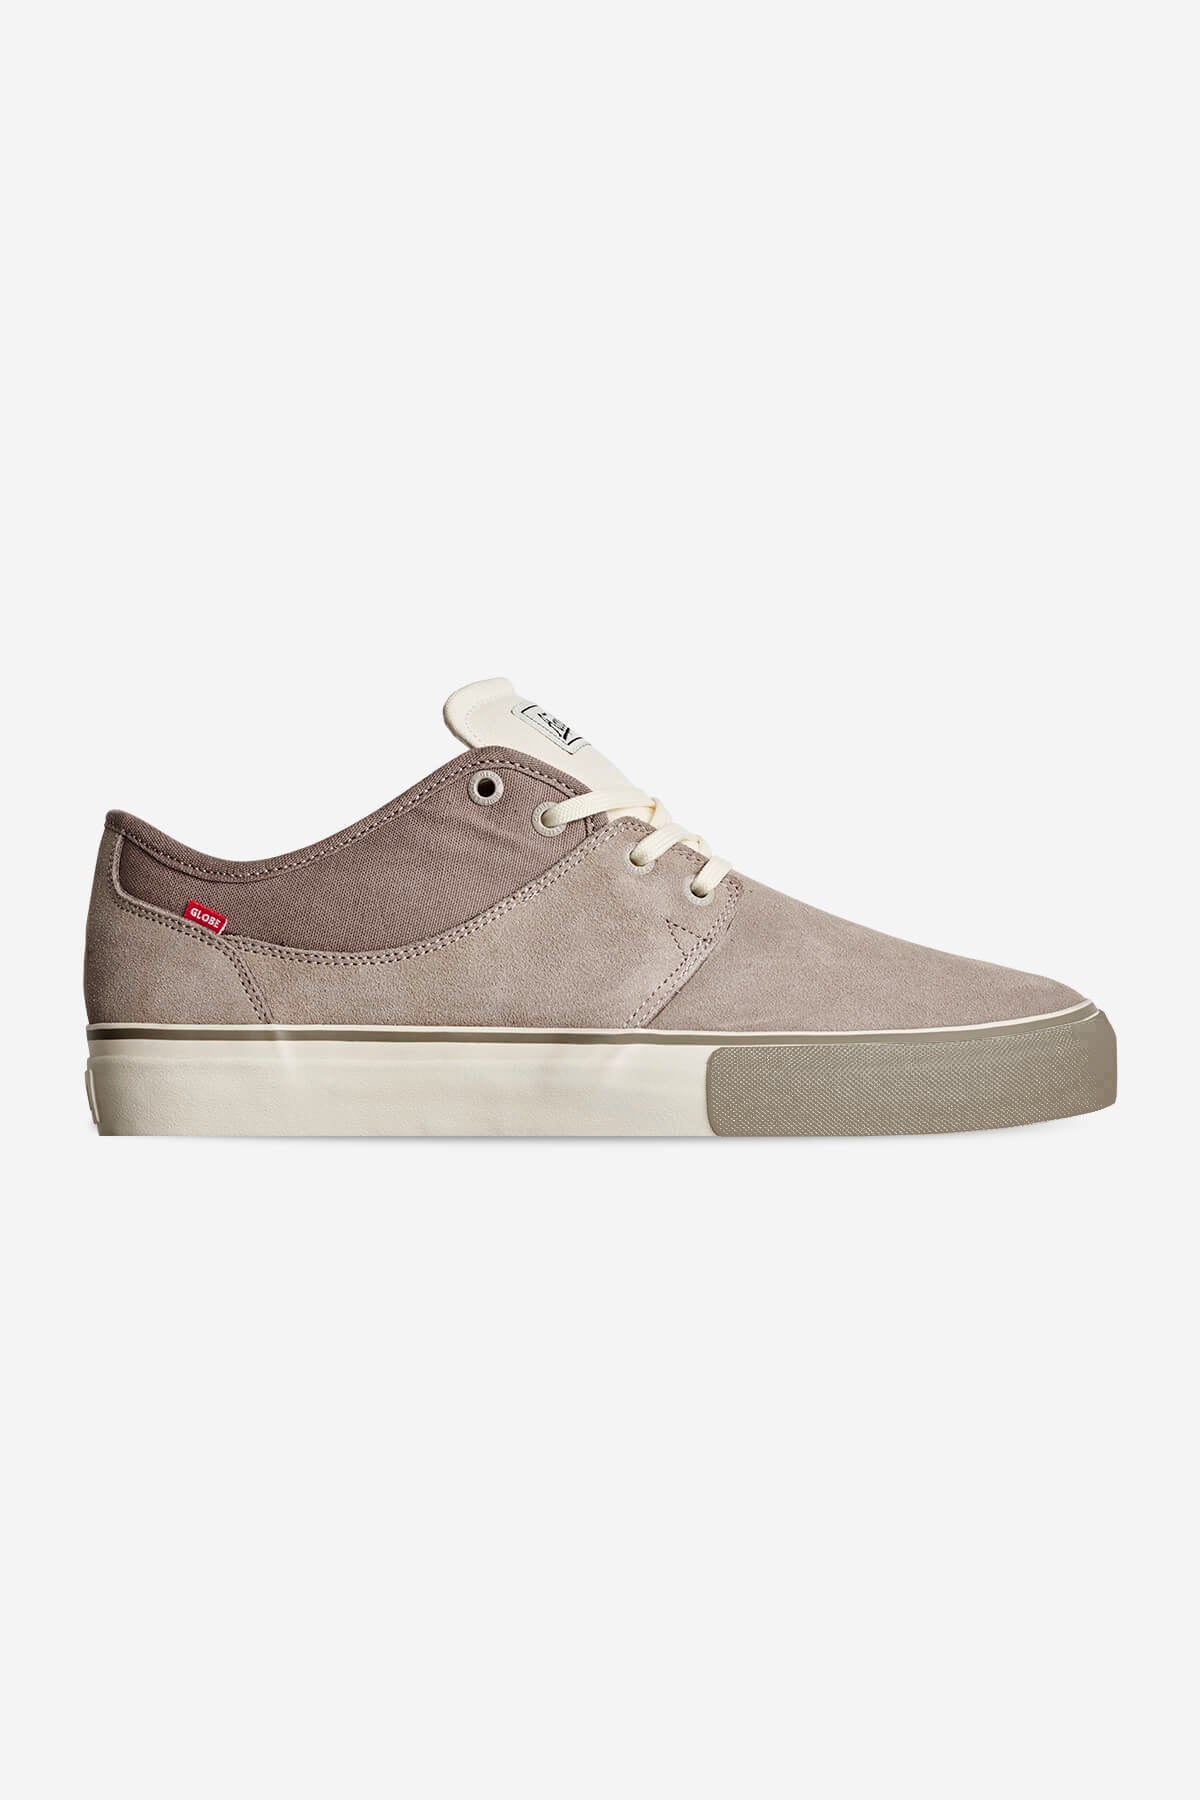 Mahalo - Taupe/Antique - Skate Shoes